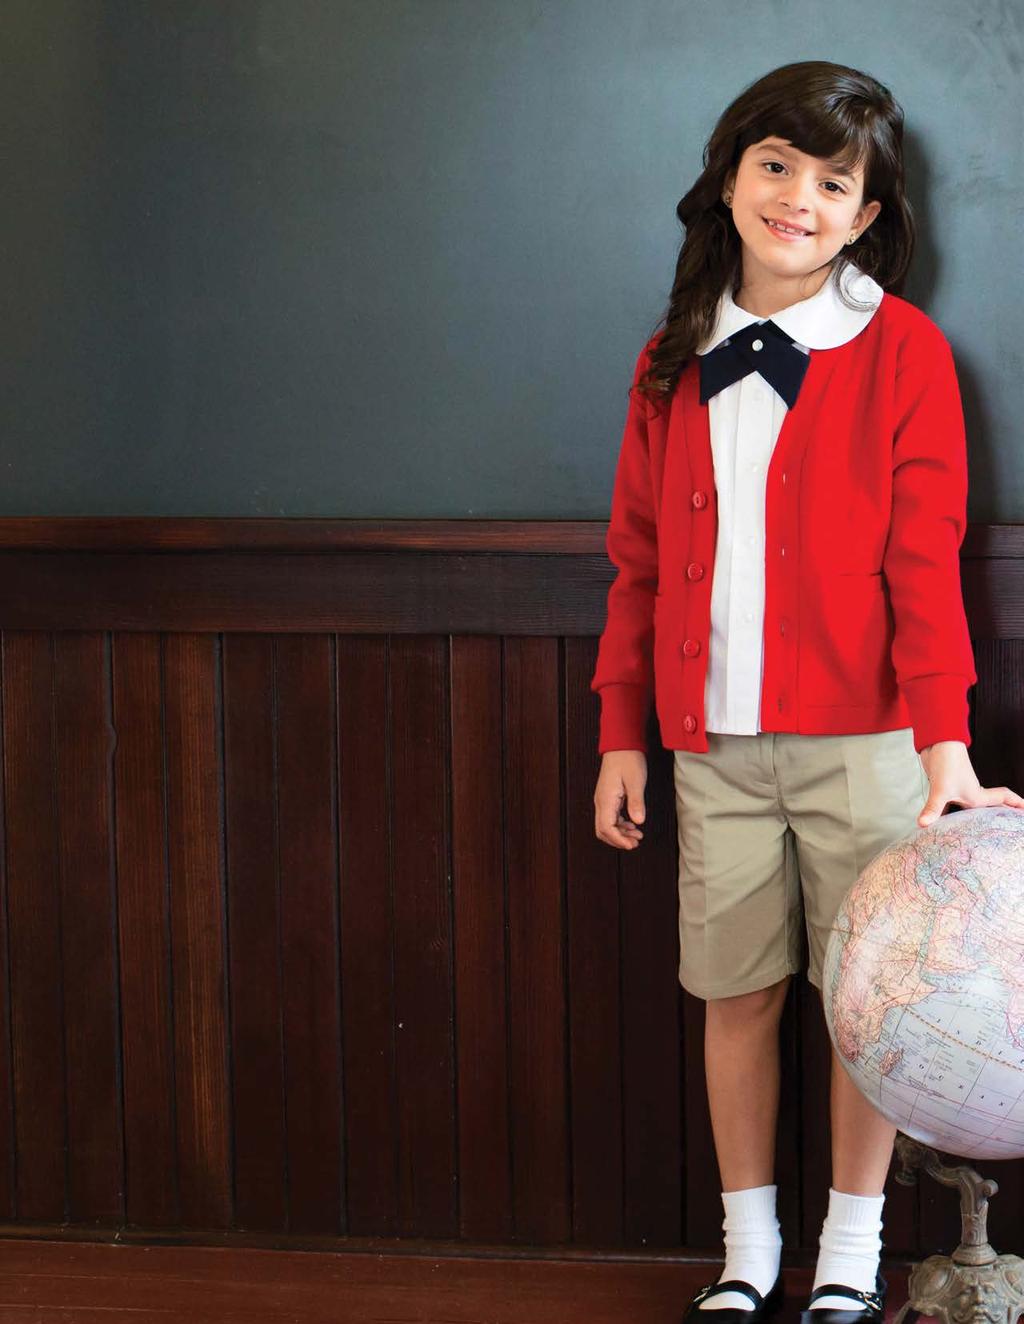 BOYS AND GIRLS BOYS AND GIRLS sharp and smart Polish the school look with our blazer!